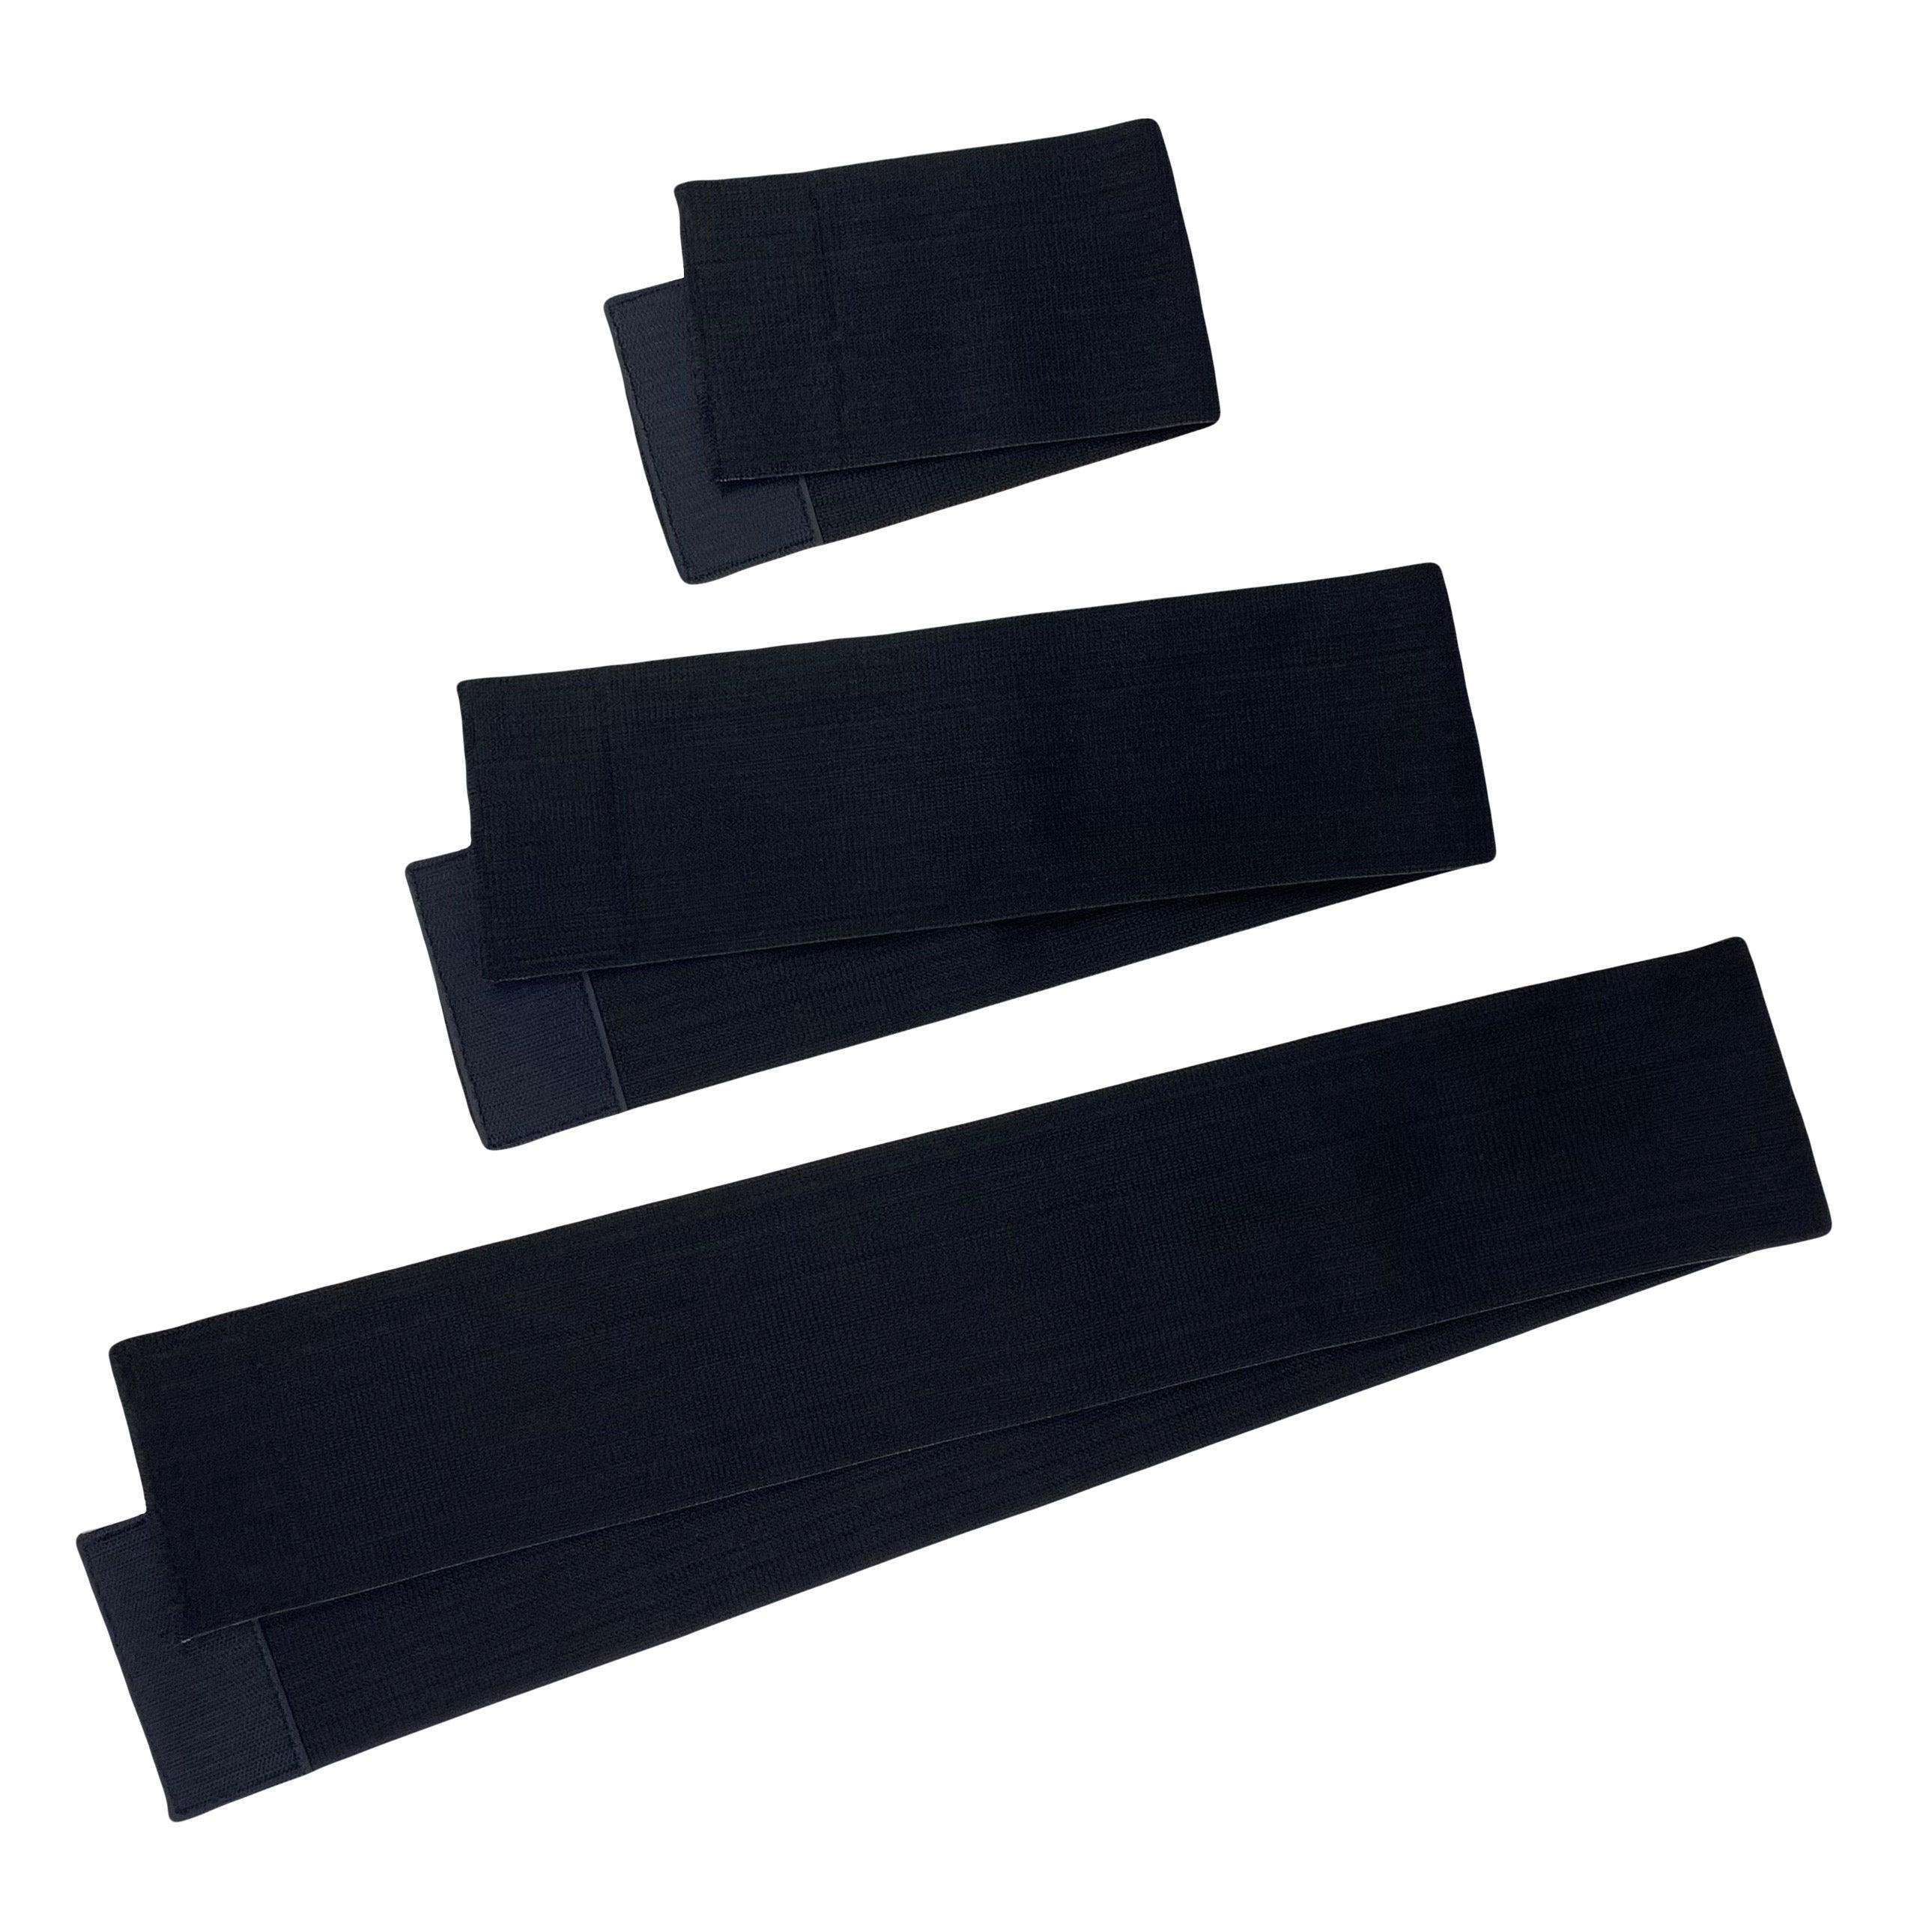 20 Dollar Deals - Universal Cold Therapy Velcro Straps (3 Pack) - Universal-Velcro-Straps-3pk 20 Dollar Deals - Universal Cold Therapy Velcro Straps (3 Pack) - undefined by Supply Physical Therapy 